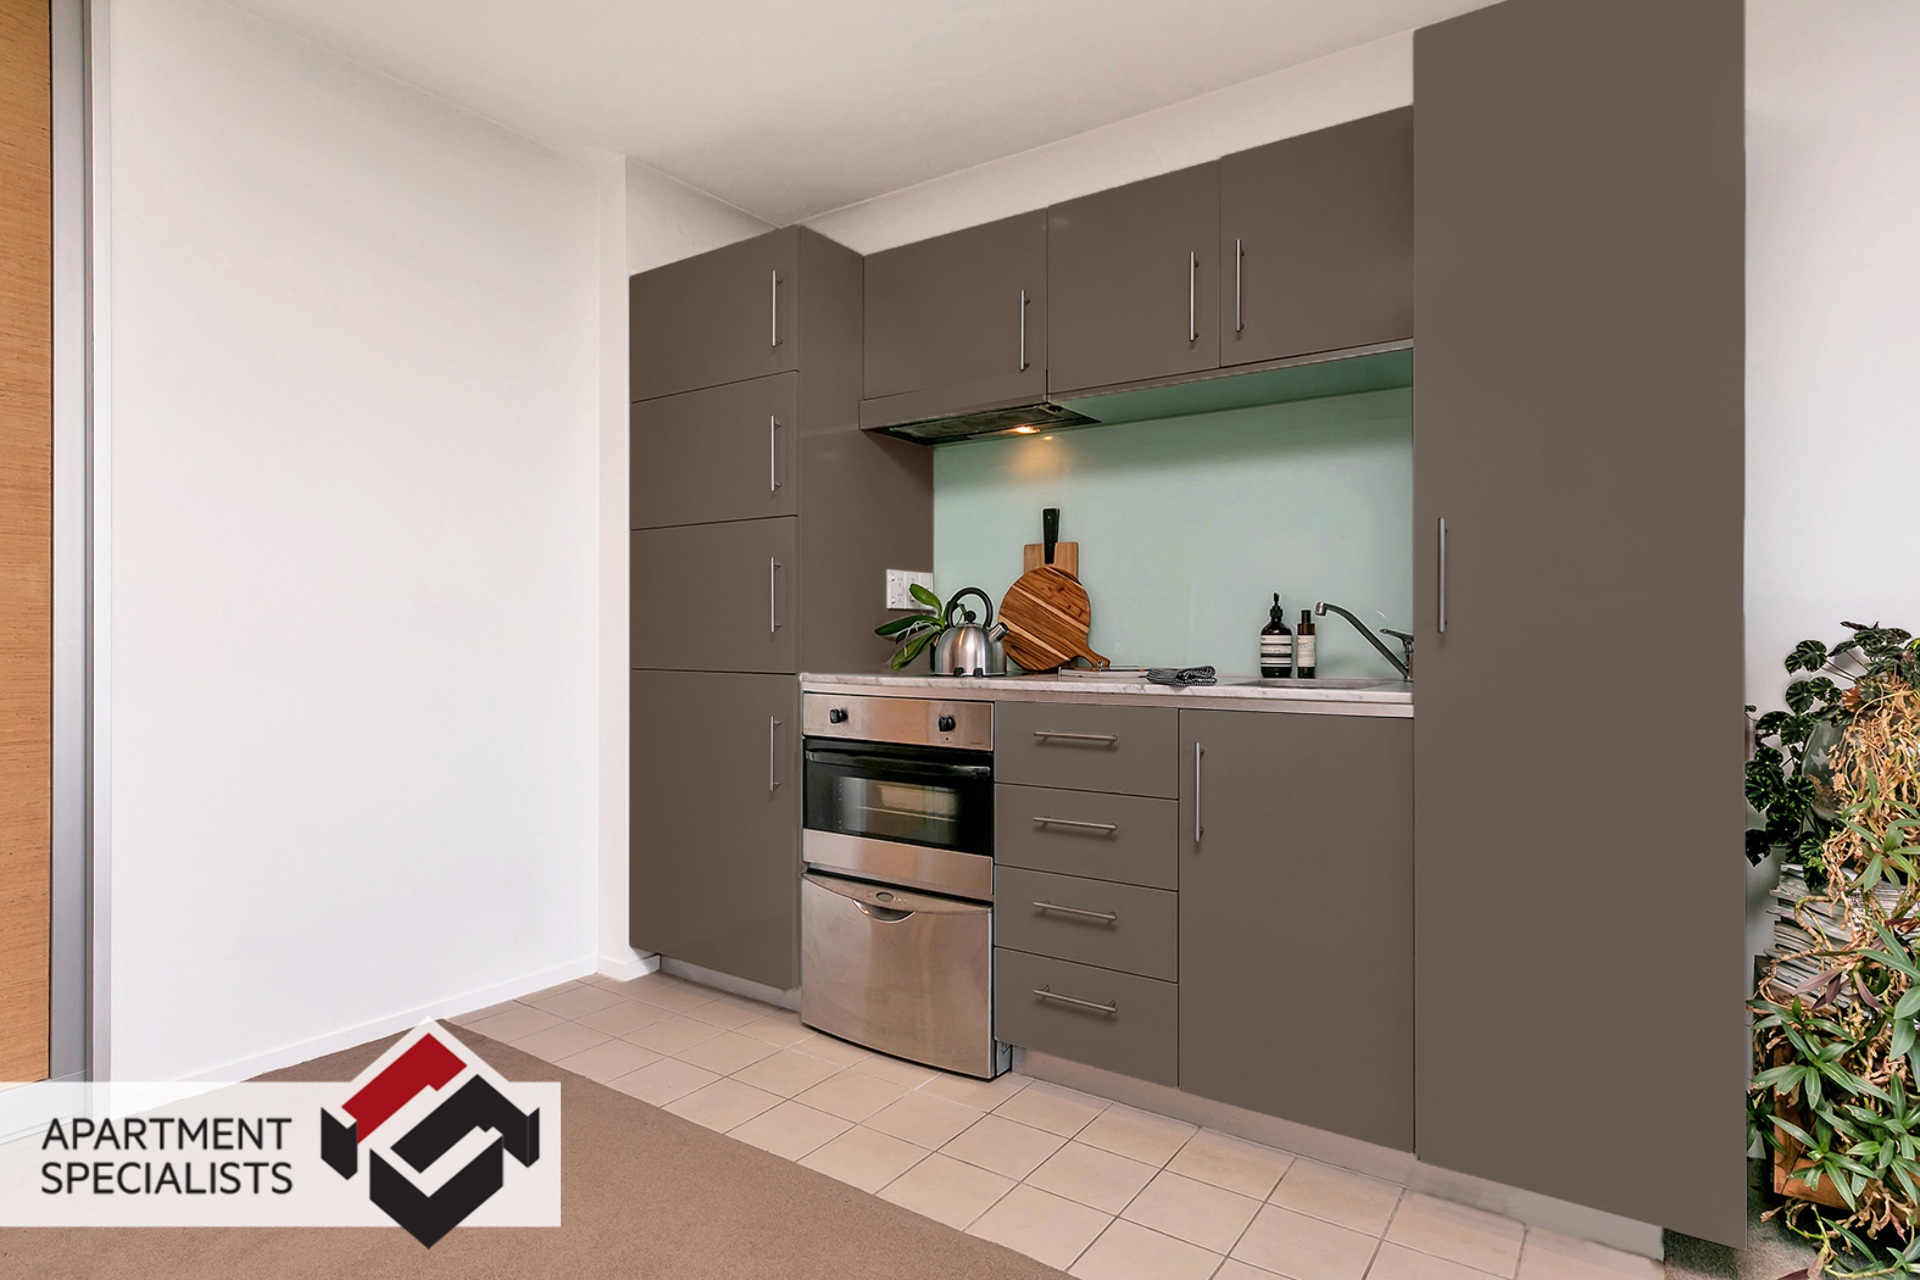 4 | 80 Richmond Road, Ponsonby | Apartment Specialists